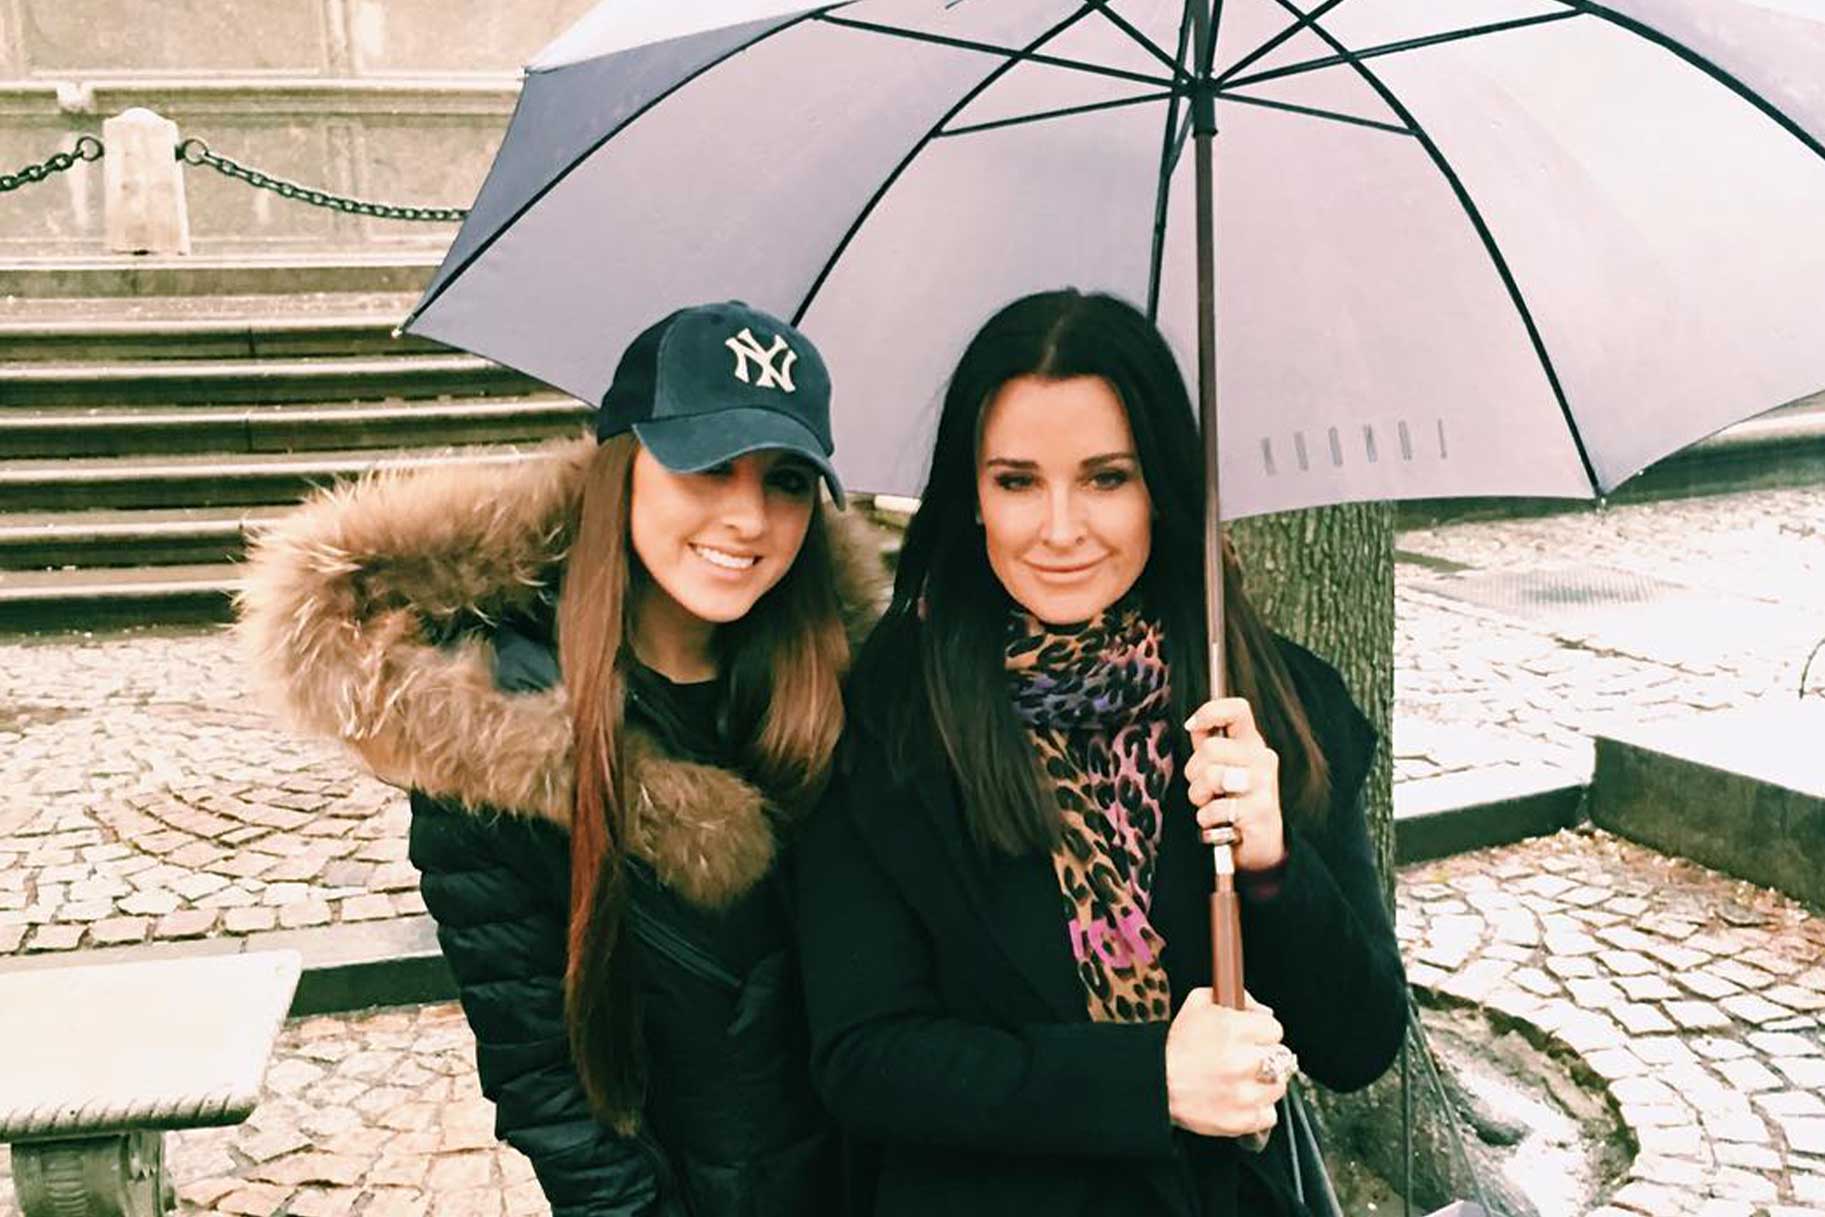 Alexia Umansky and Kyle Richards of the Real Housewives of Beverly Hills.